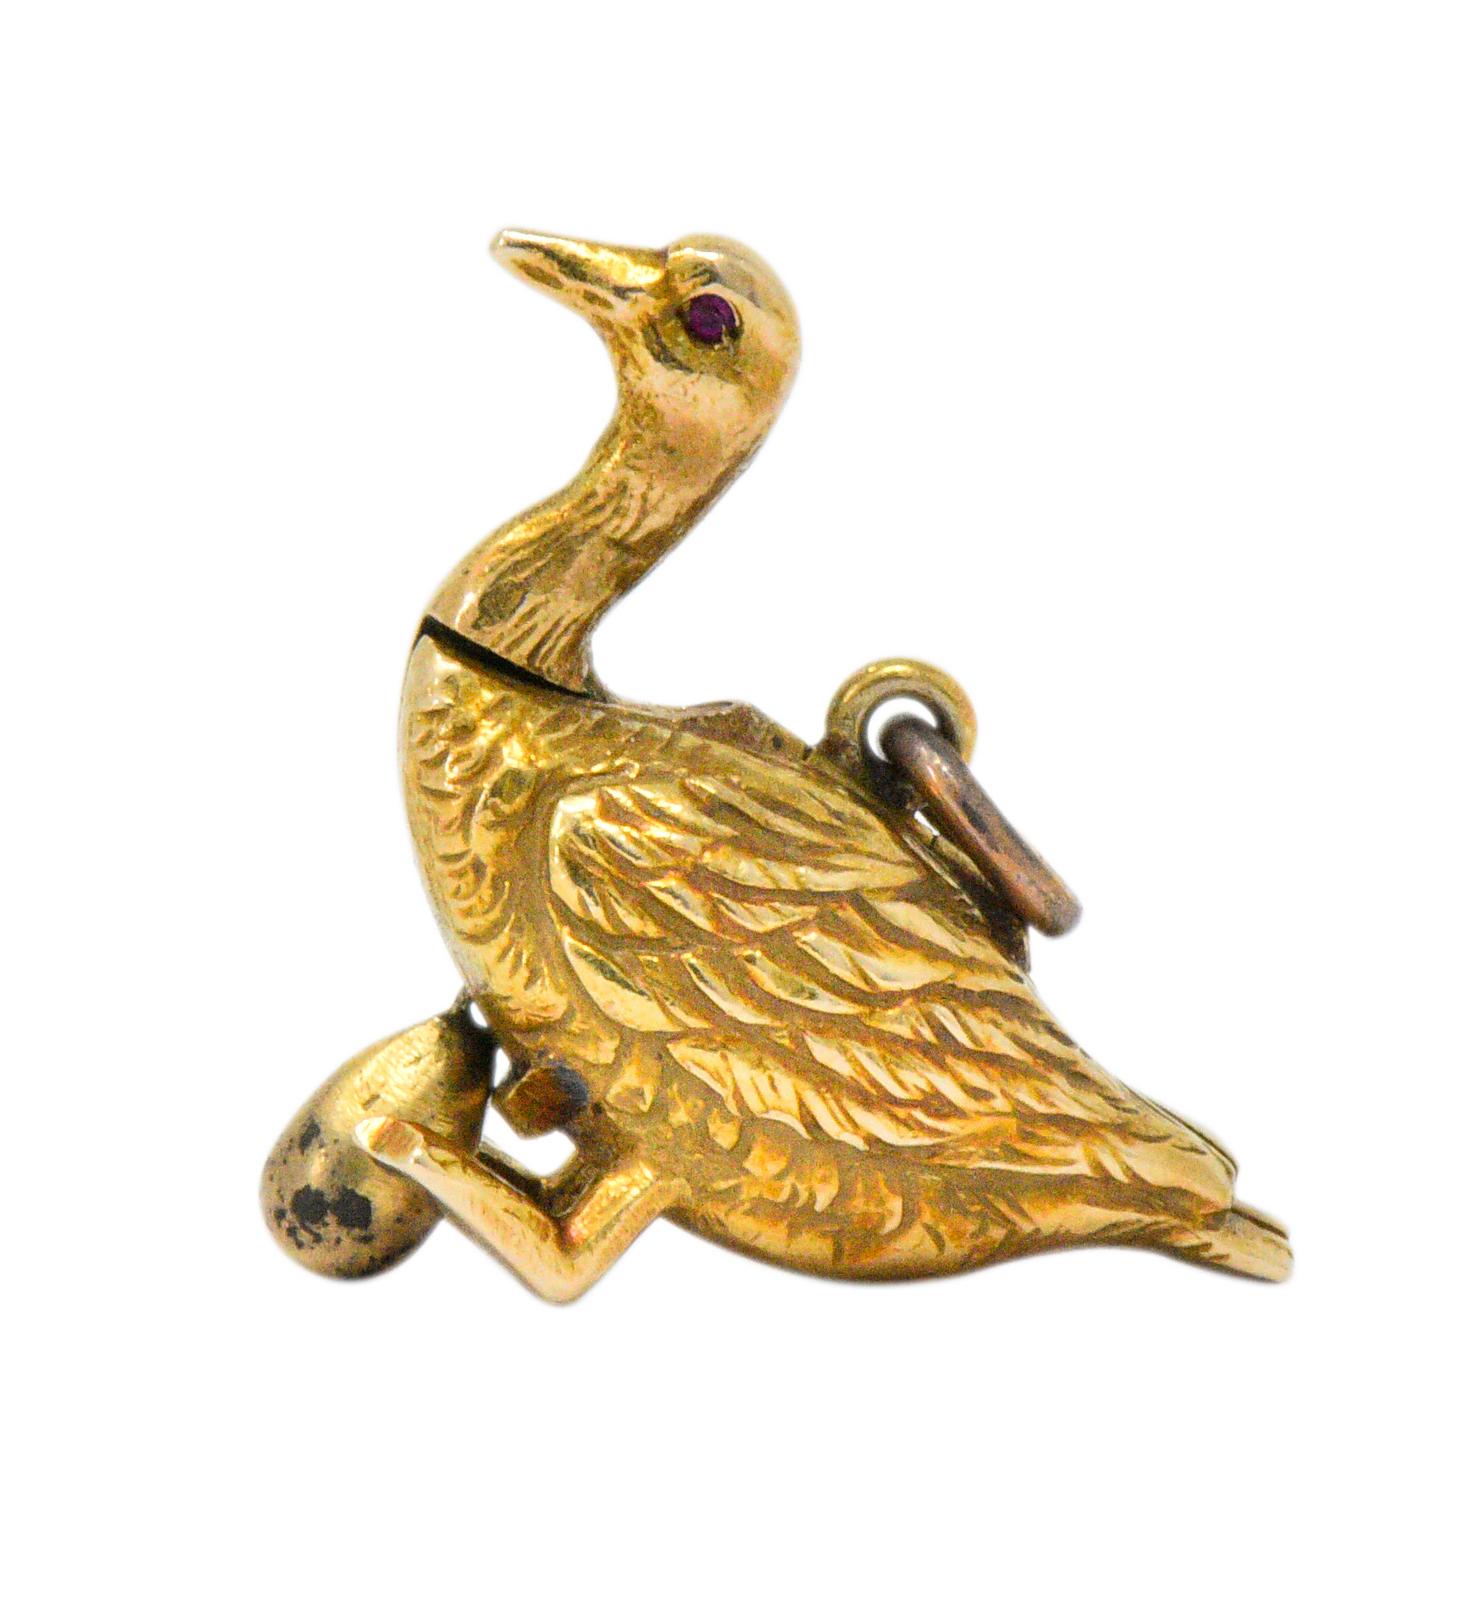 Designed as a goose with tiny ruby eye

Opens to reveal a golden egg attached with a chain

Fantastic engraved gold detail showing texture and feathers

Stamped 14 karat

Measures: Approx. 1 x 1/4 Inches

Total Weight: 3.1 Grams

Luck. Abundance.